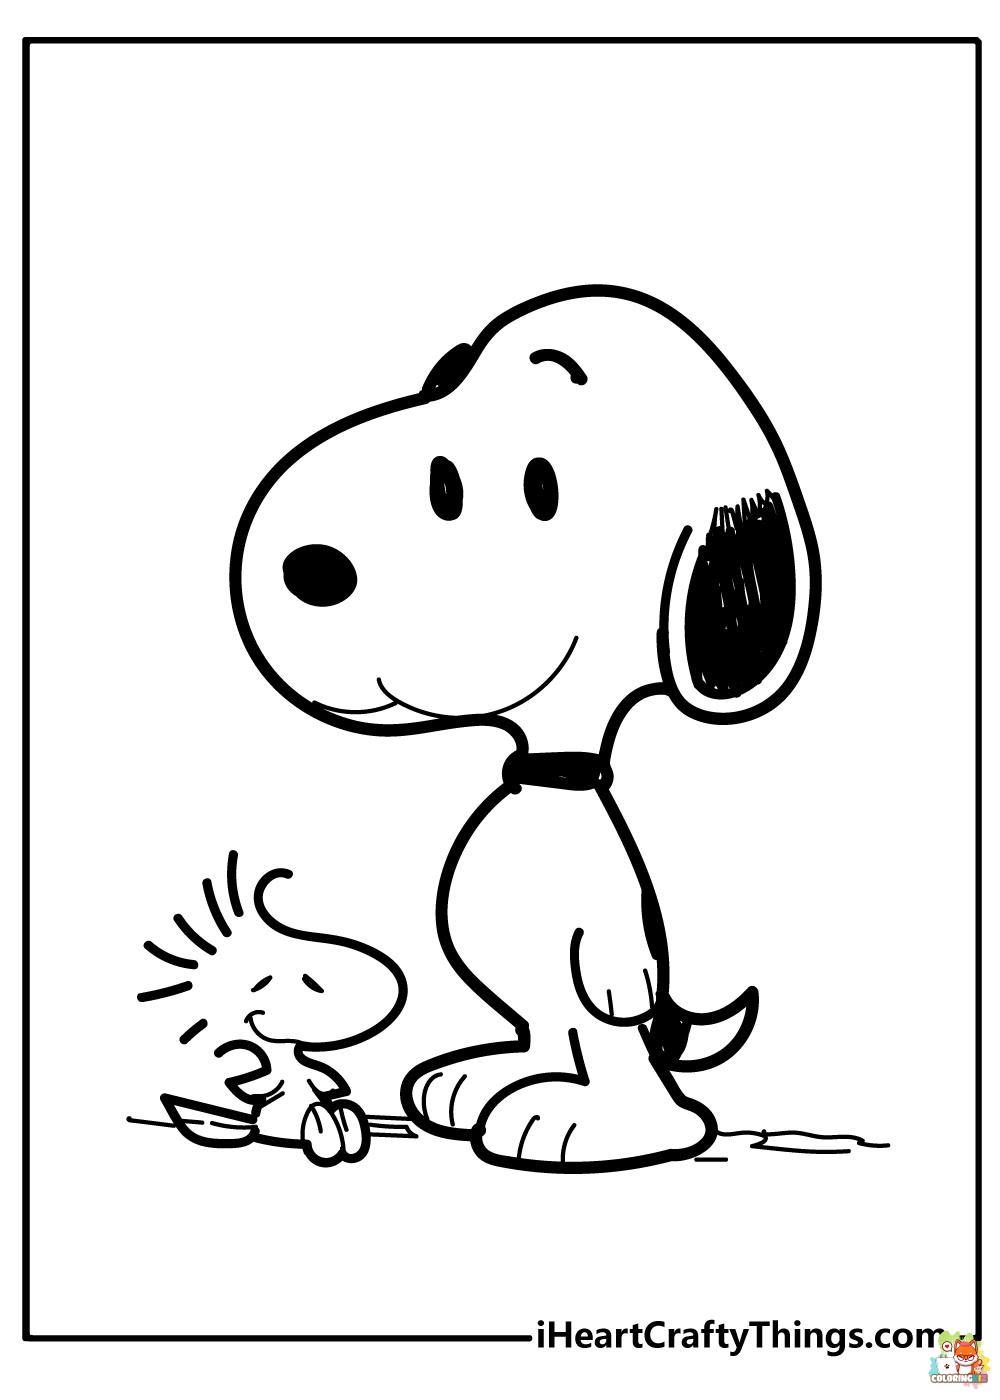 Cute Snoopy Coloring Pages 10